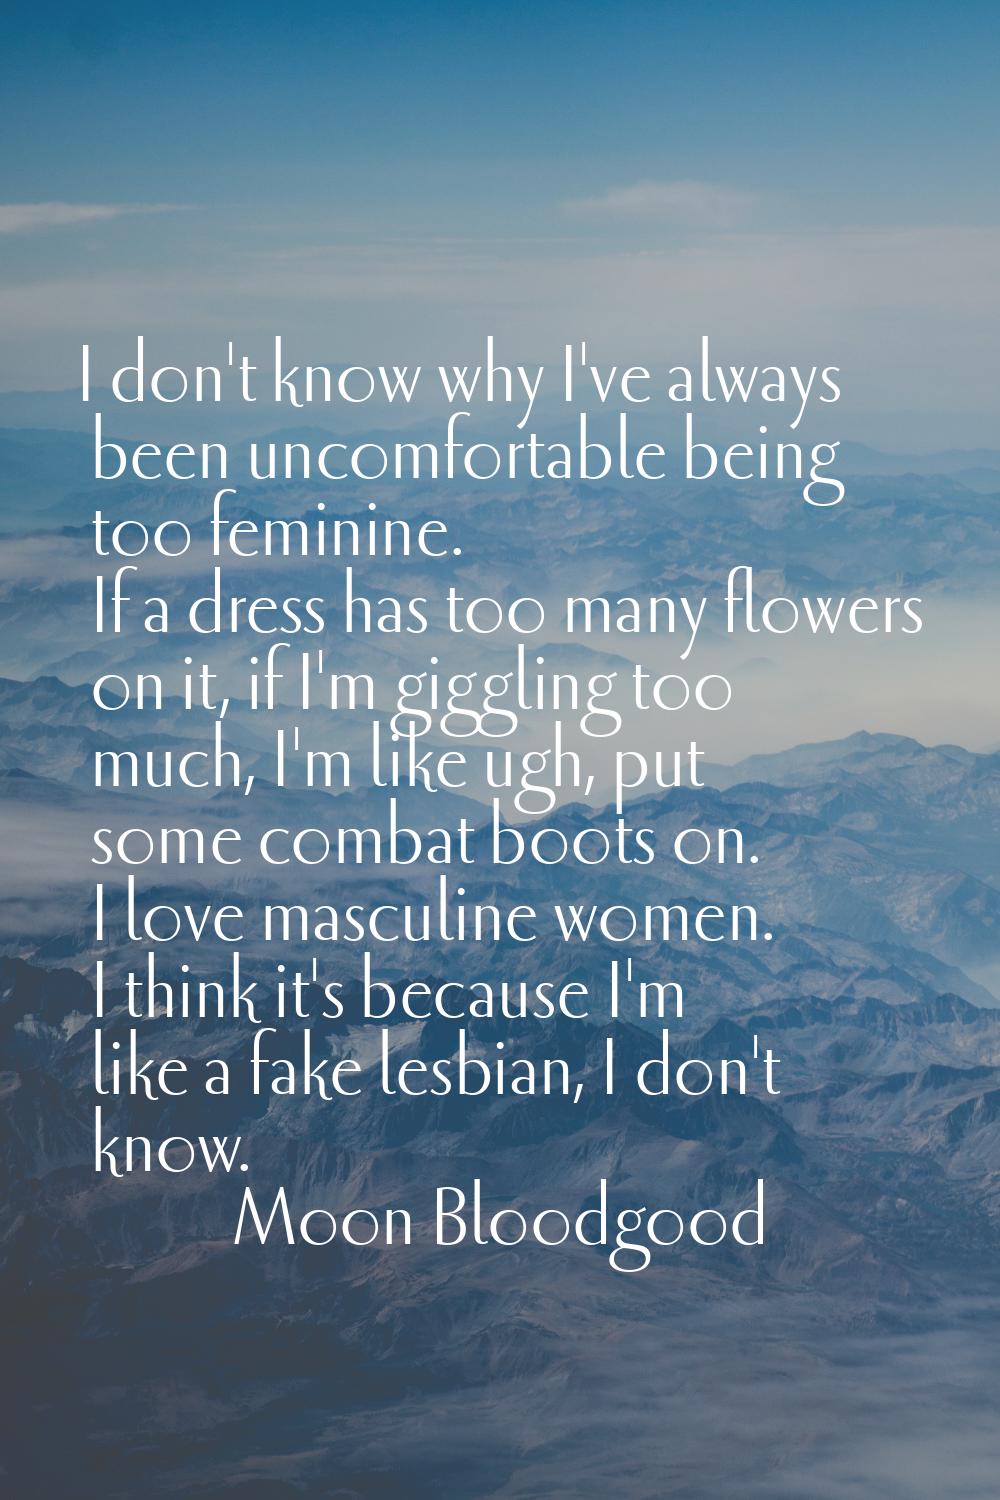 I don't know why I've always been uncomfortable being too feminine. If a dress has too many flowers